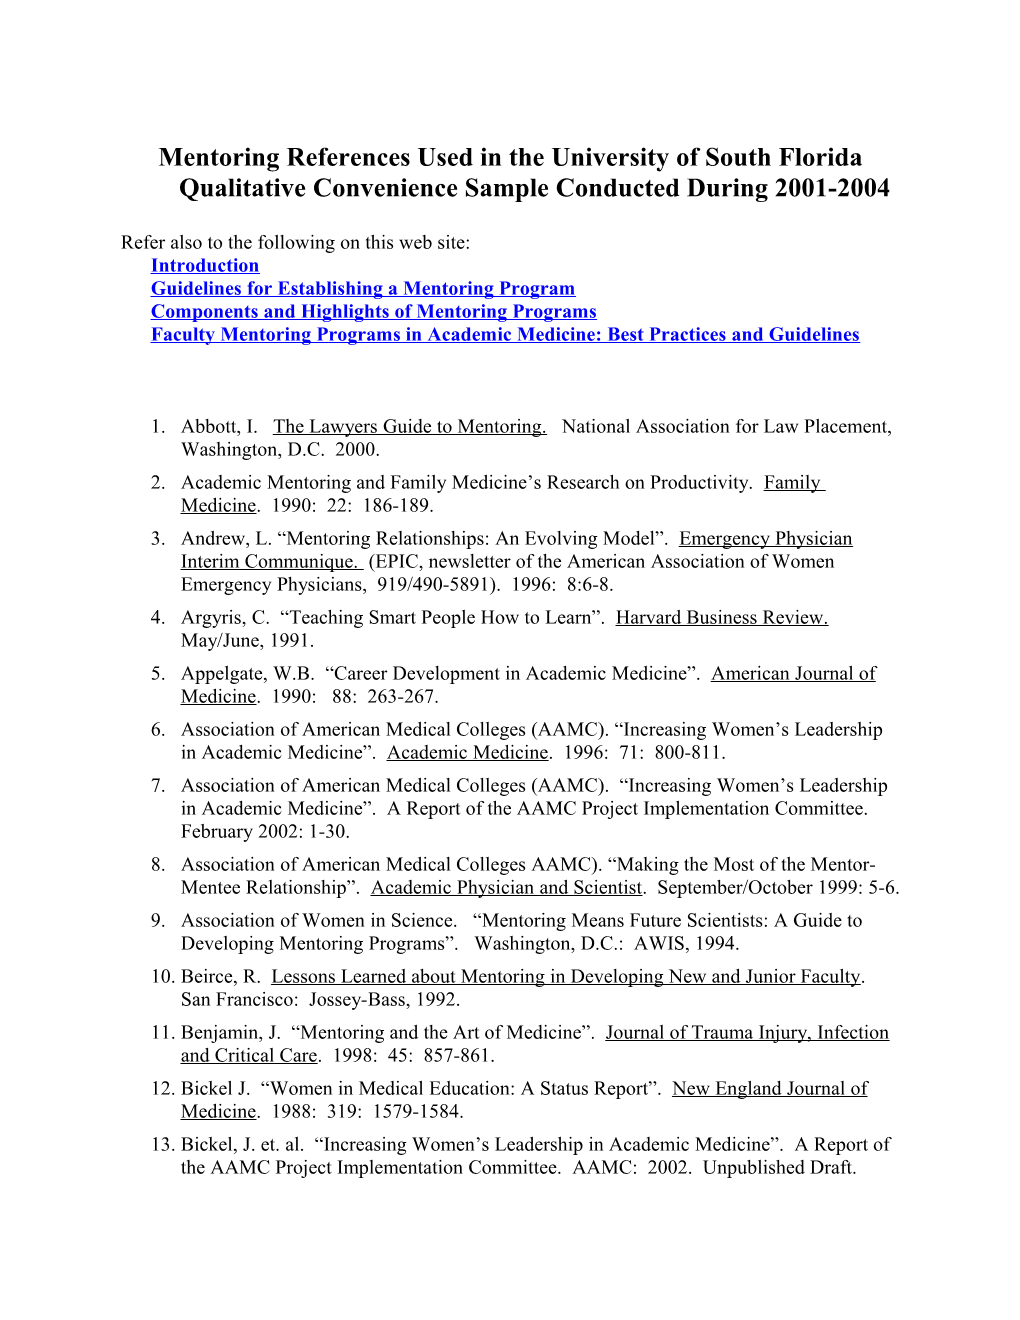 Mentoringreferences Used in the University of South Florida Qualitative Convenience Sample